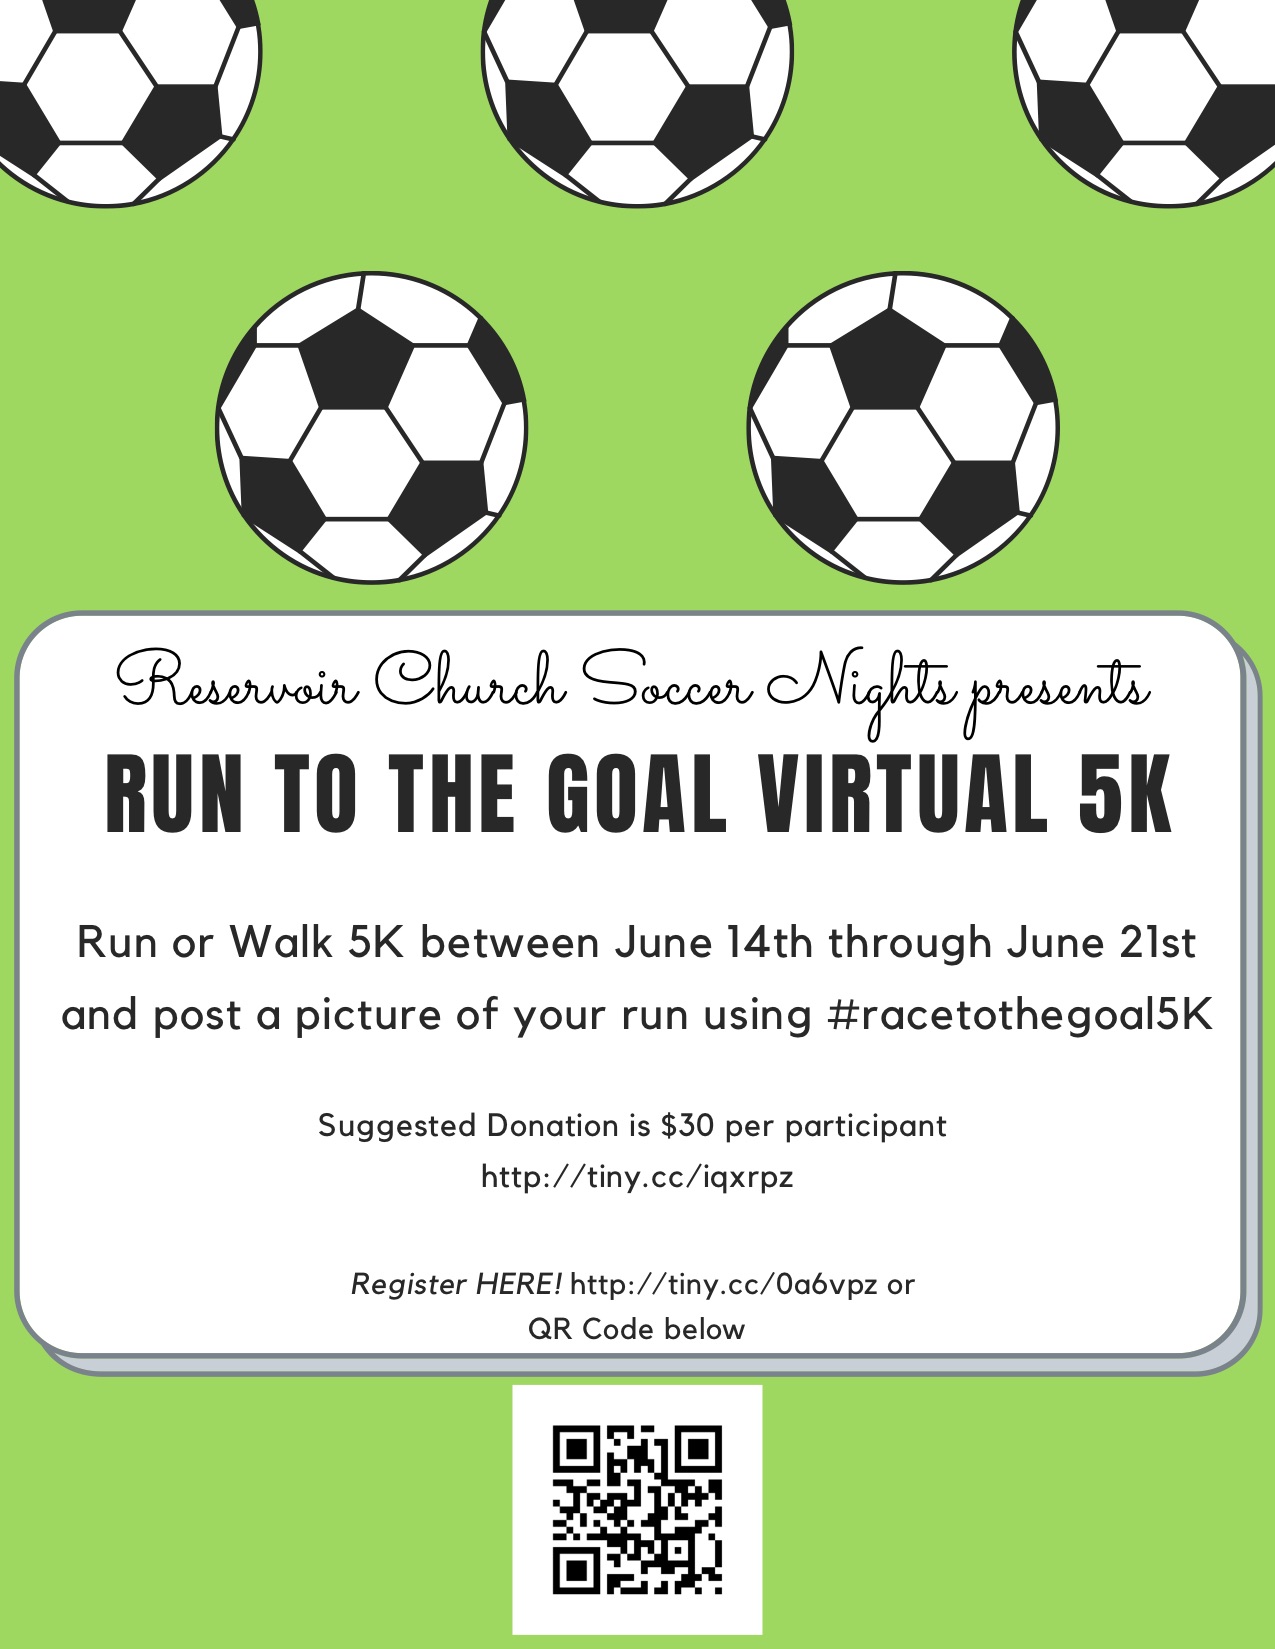 Green background with soccer balls drawn. Text reads: "Reservoir Church Soccer Nights Presents 'Run to the Goal Virtual 5K'"